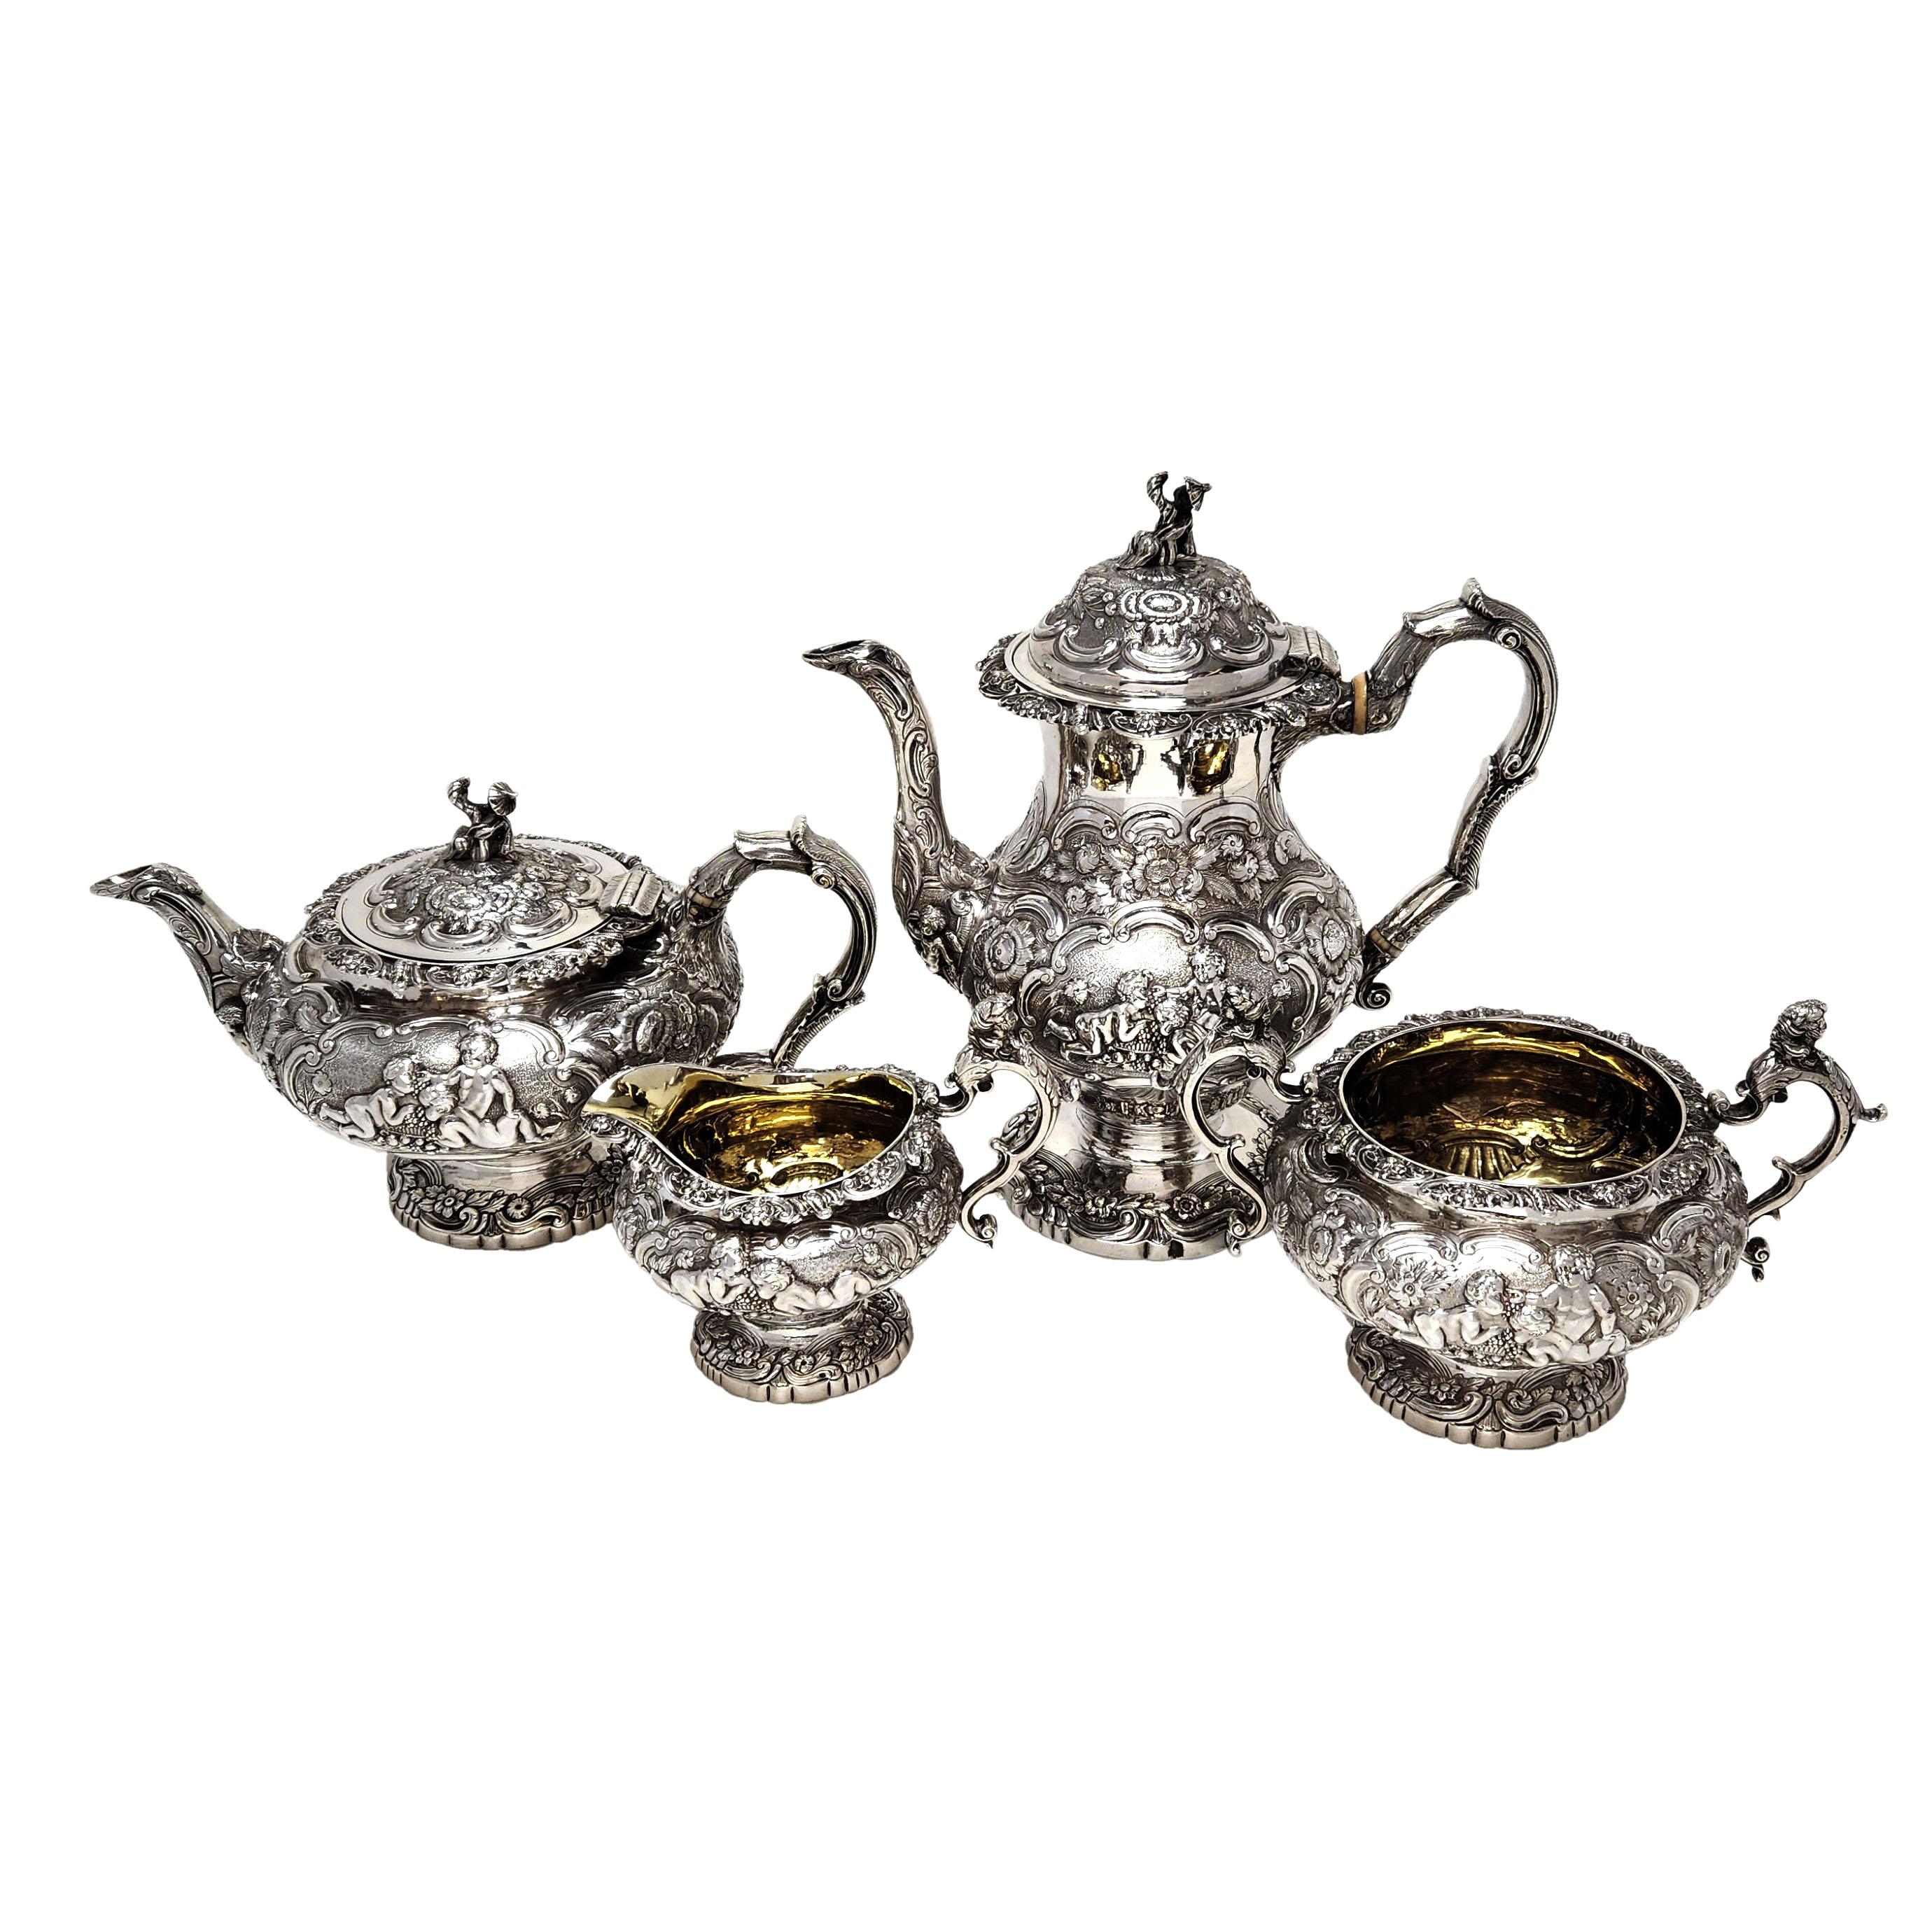 A beautiful antique George V sterling silver 4 piece Tea & Coffee Set comprising of a coffee pot, teapot, sugar bowl and milk / cream Jug. The pieces have a classic baluster shape. Each piece is emebellished with ornate chased designs including